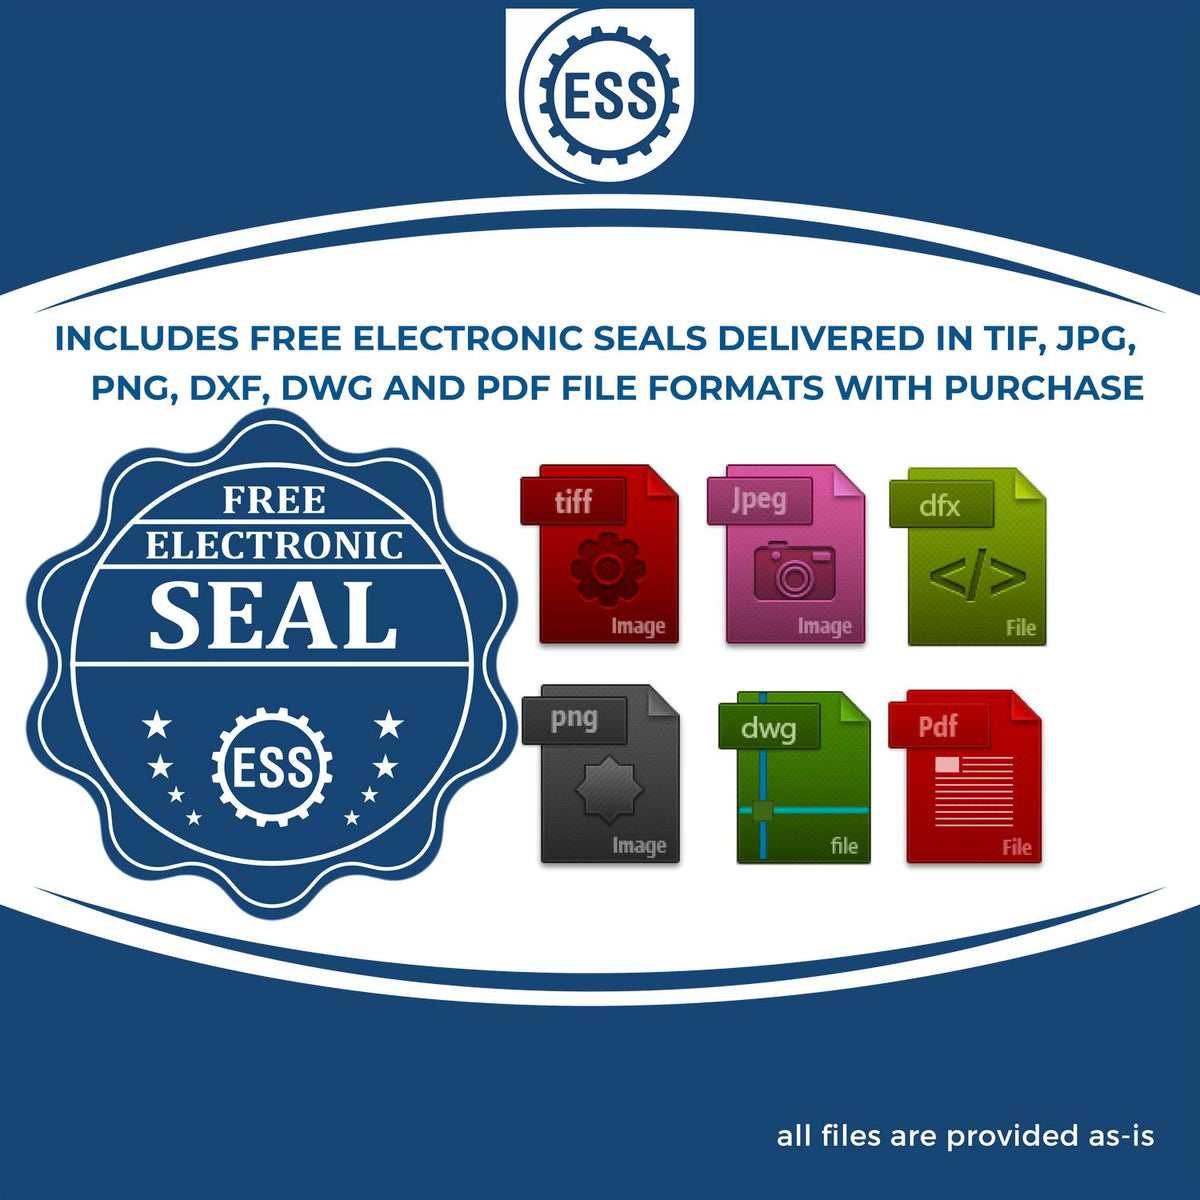 An infographic for the free electronic seal for the Handheld Arkansas Land Surveyor Seal illustrating the different file type icons such as DXF, DWG, TIF, JPG and PNG.